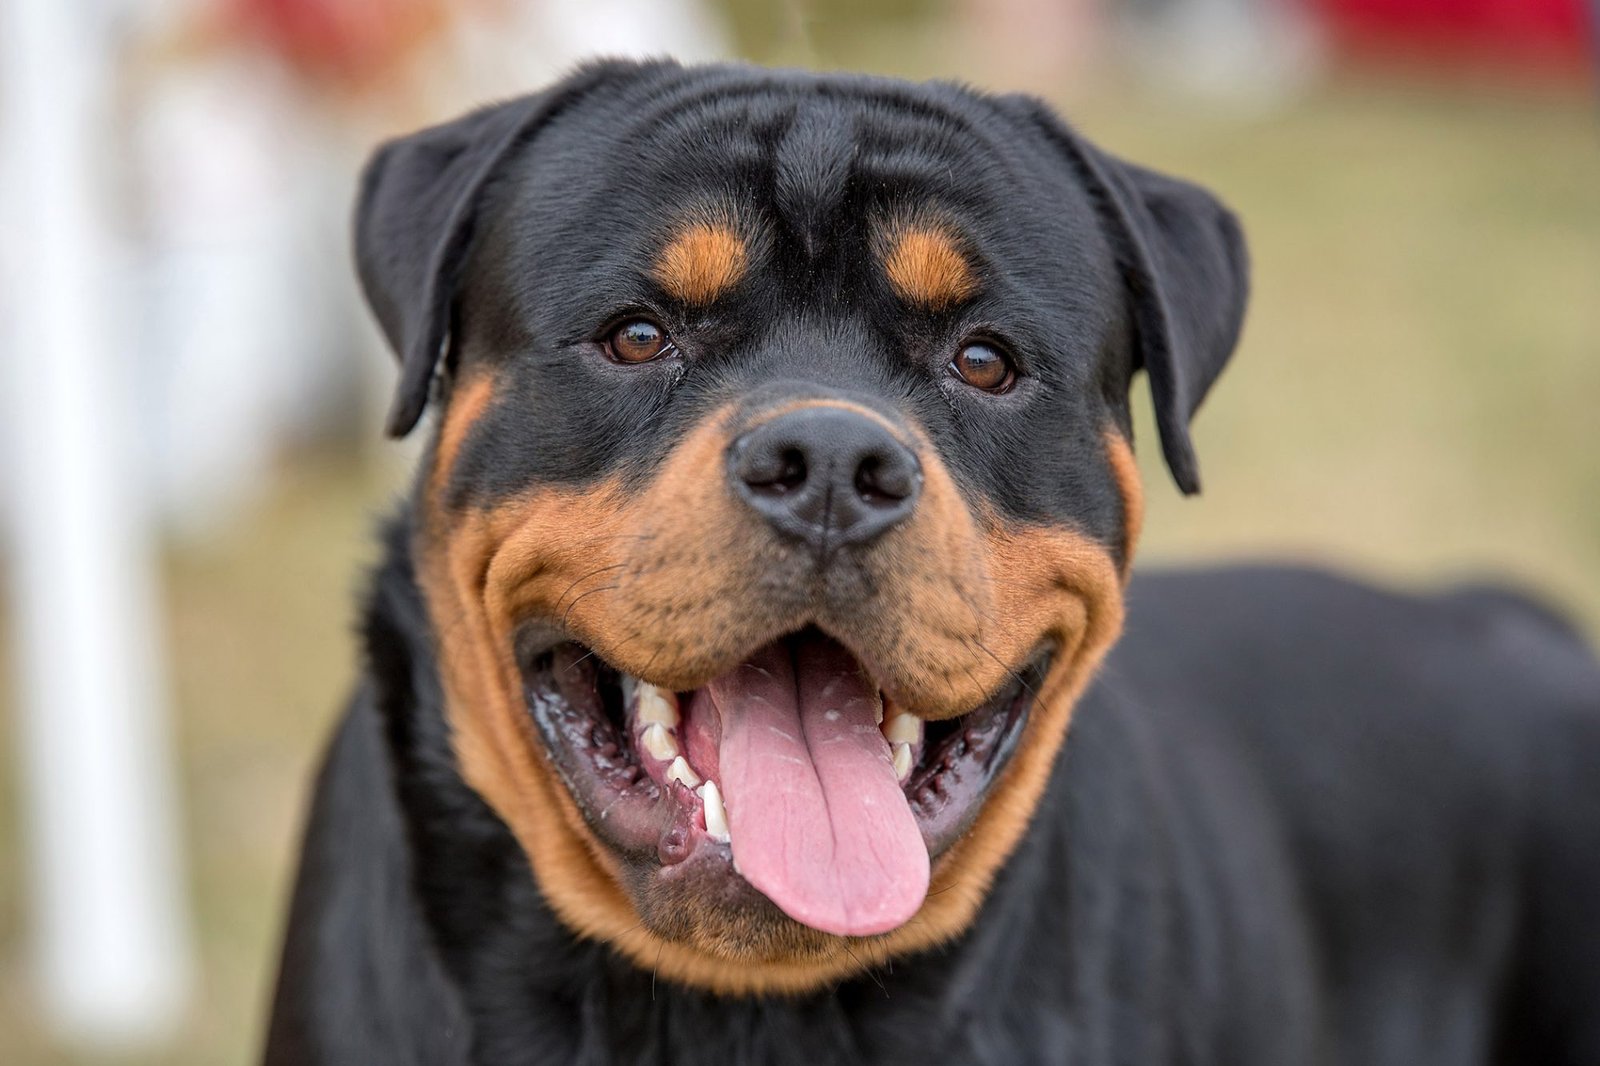 where did the rottweiler dog come from